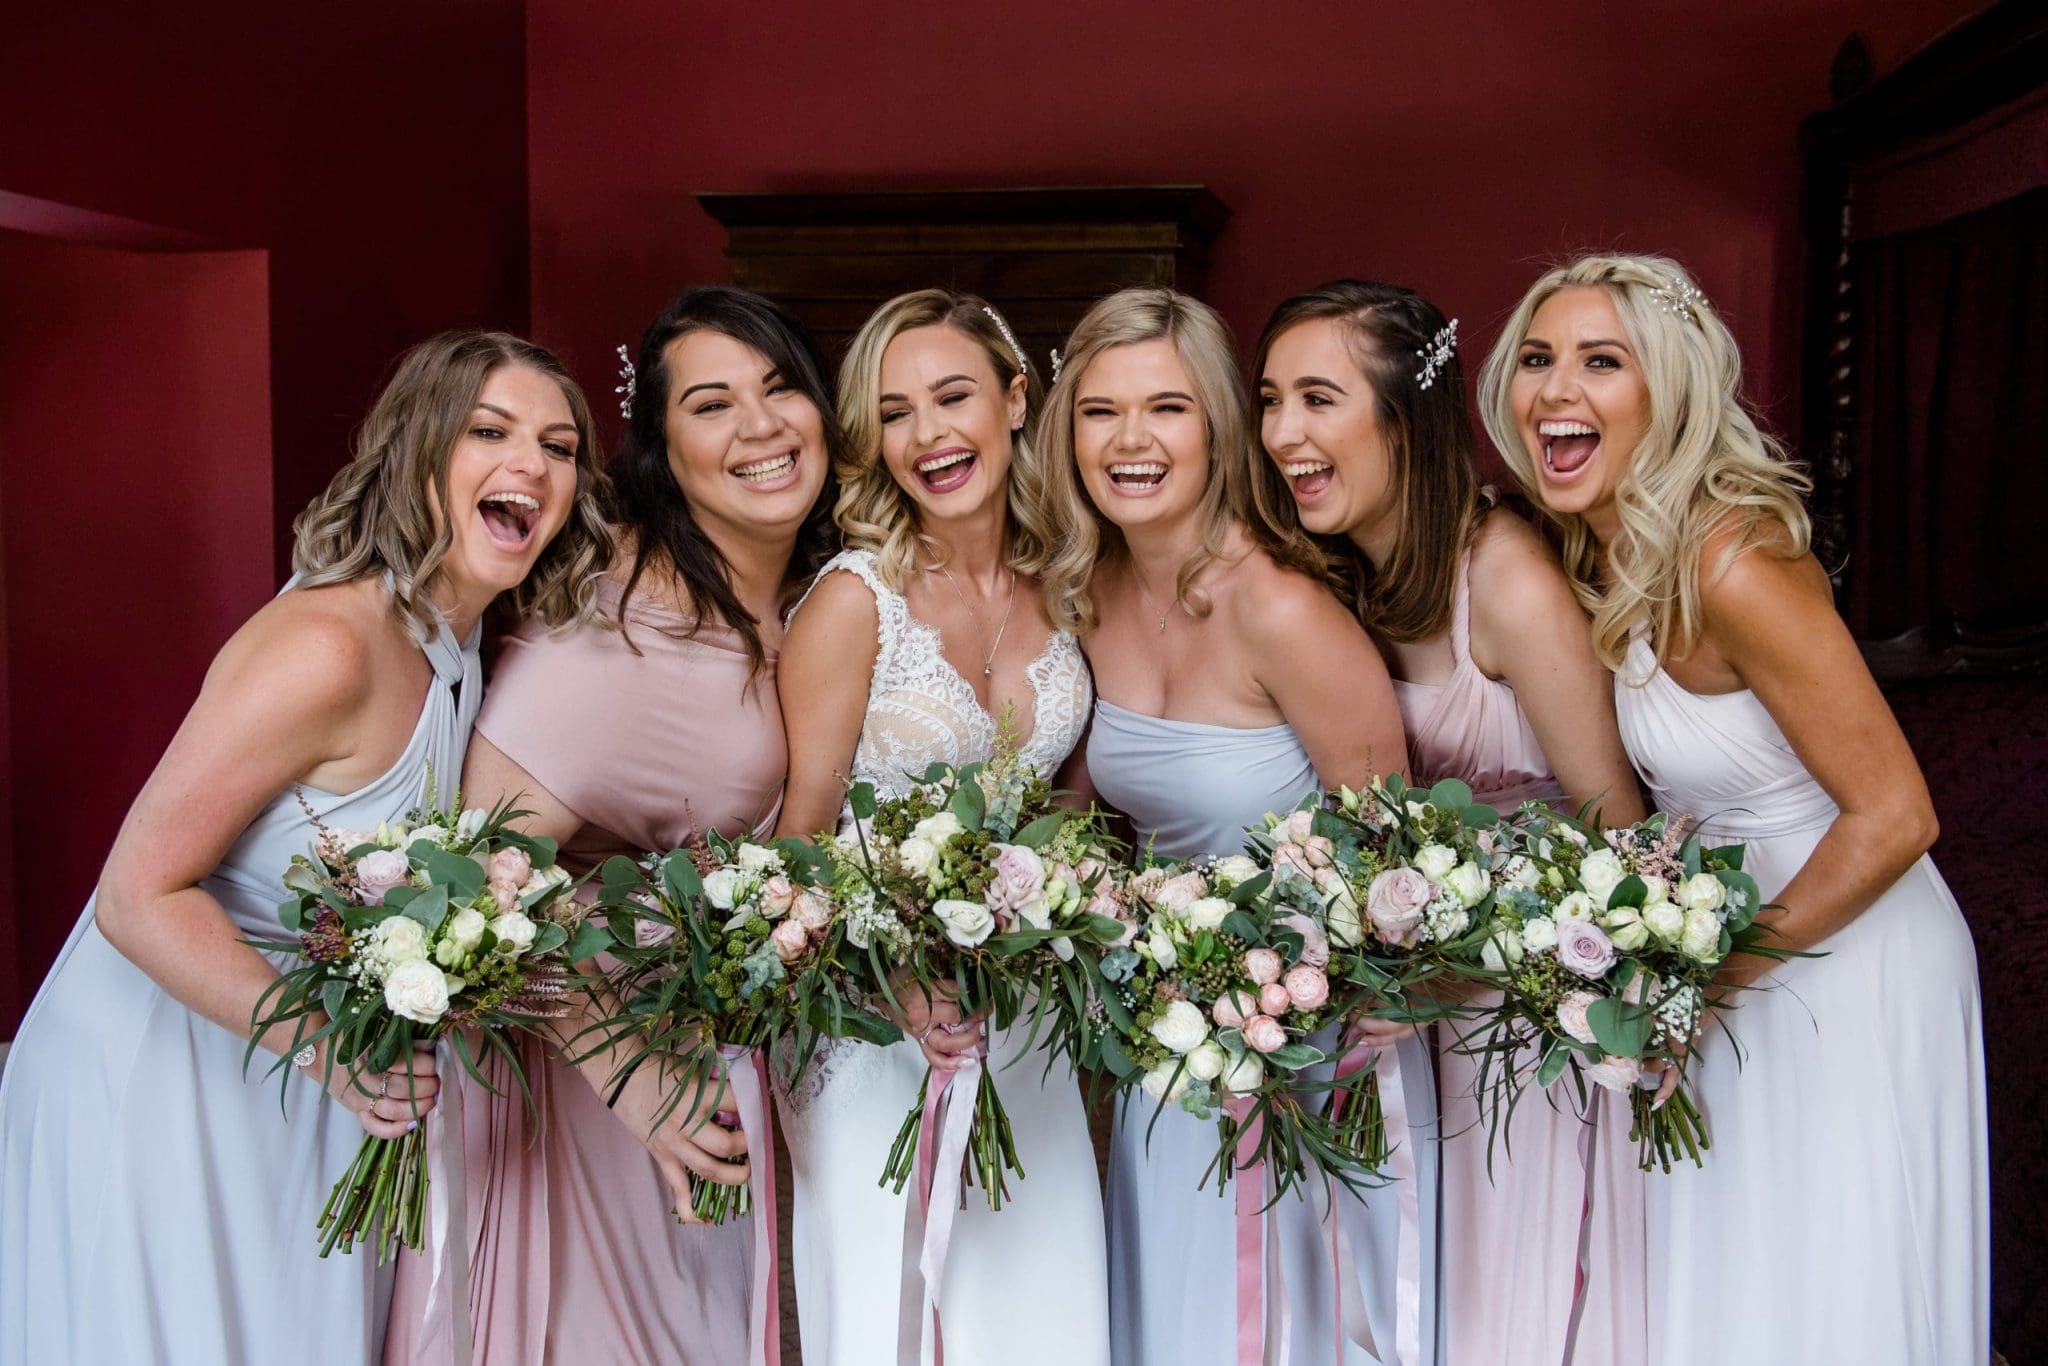 Wedding Photography of a bridal party at Parklands, Quendon Hall